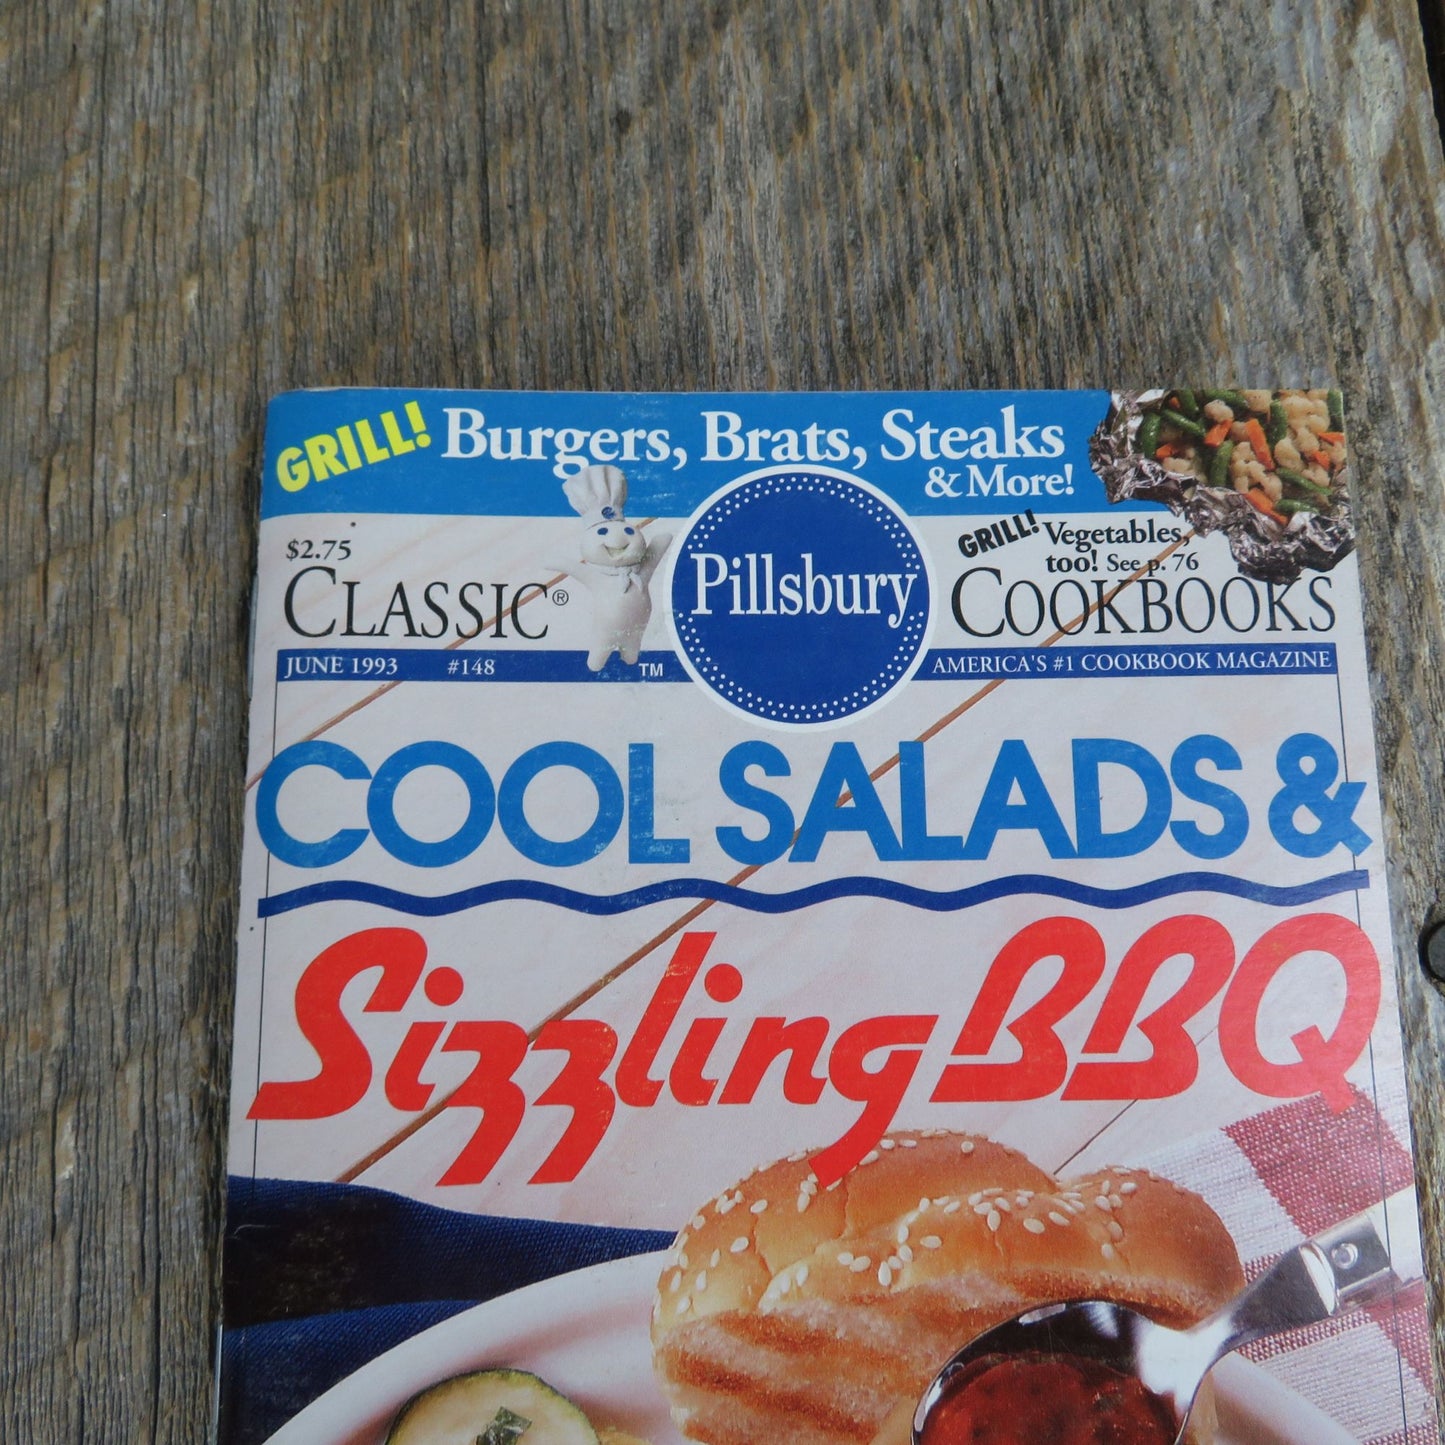 Pillsbury Cooling Salads & Sizzling BBQ Classic Cookbooks Pamphlet Grocery Store Booklet June 1993 Barbeque